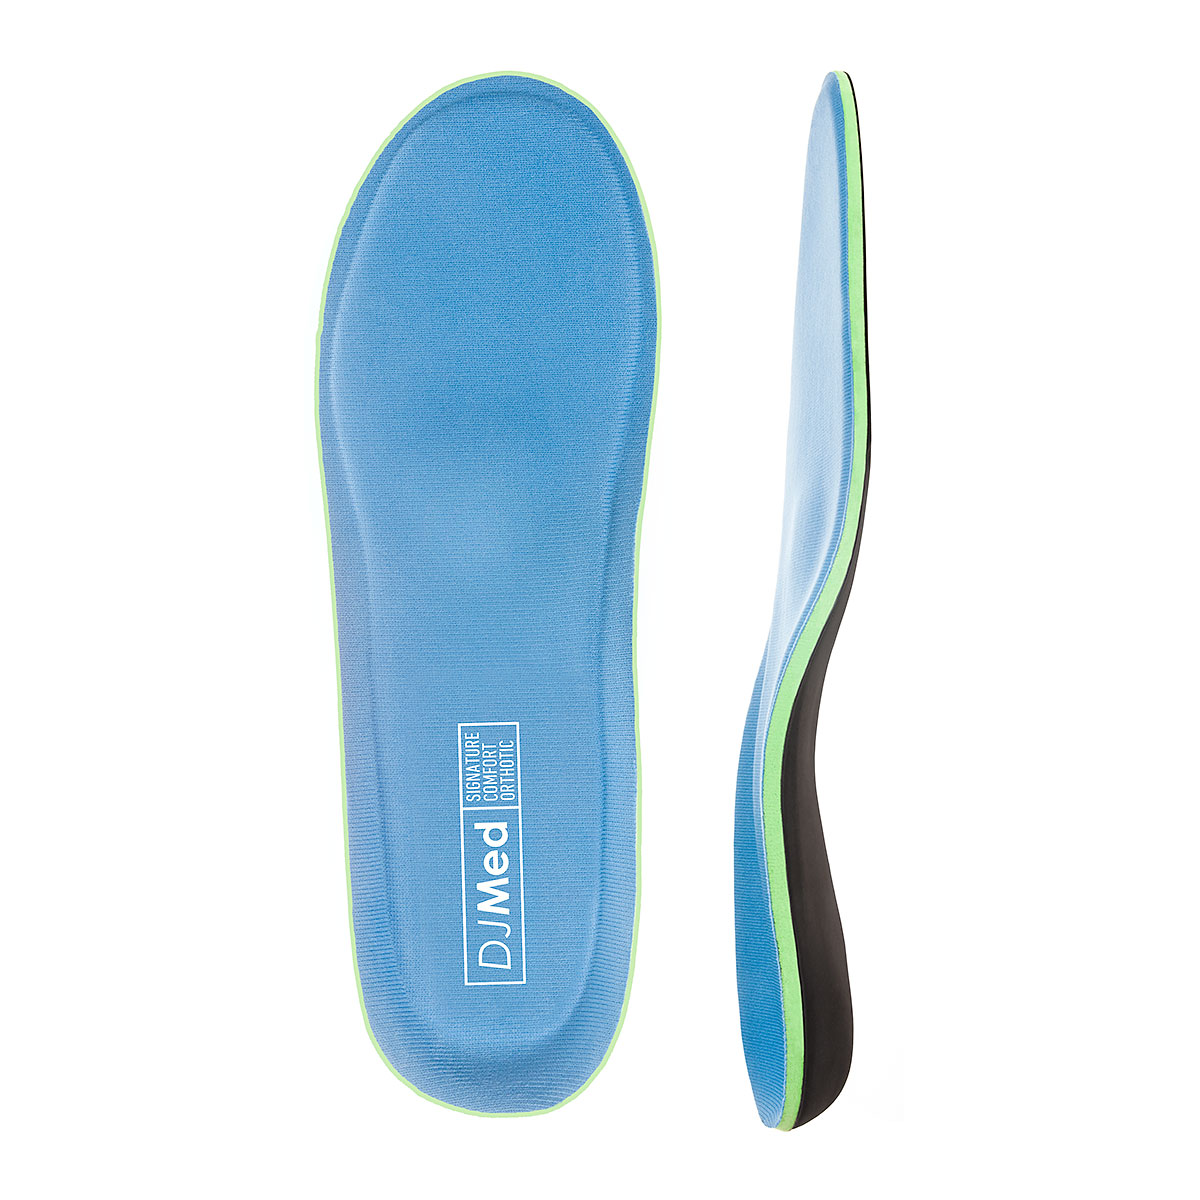 shoes with memory foam footbed